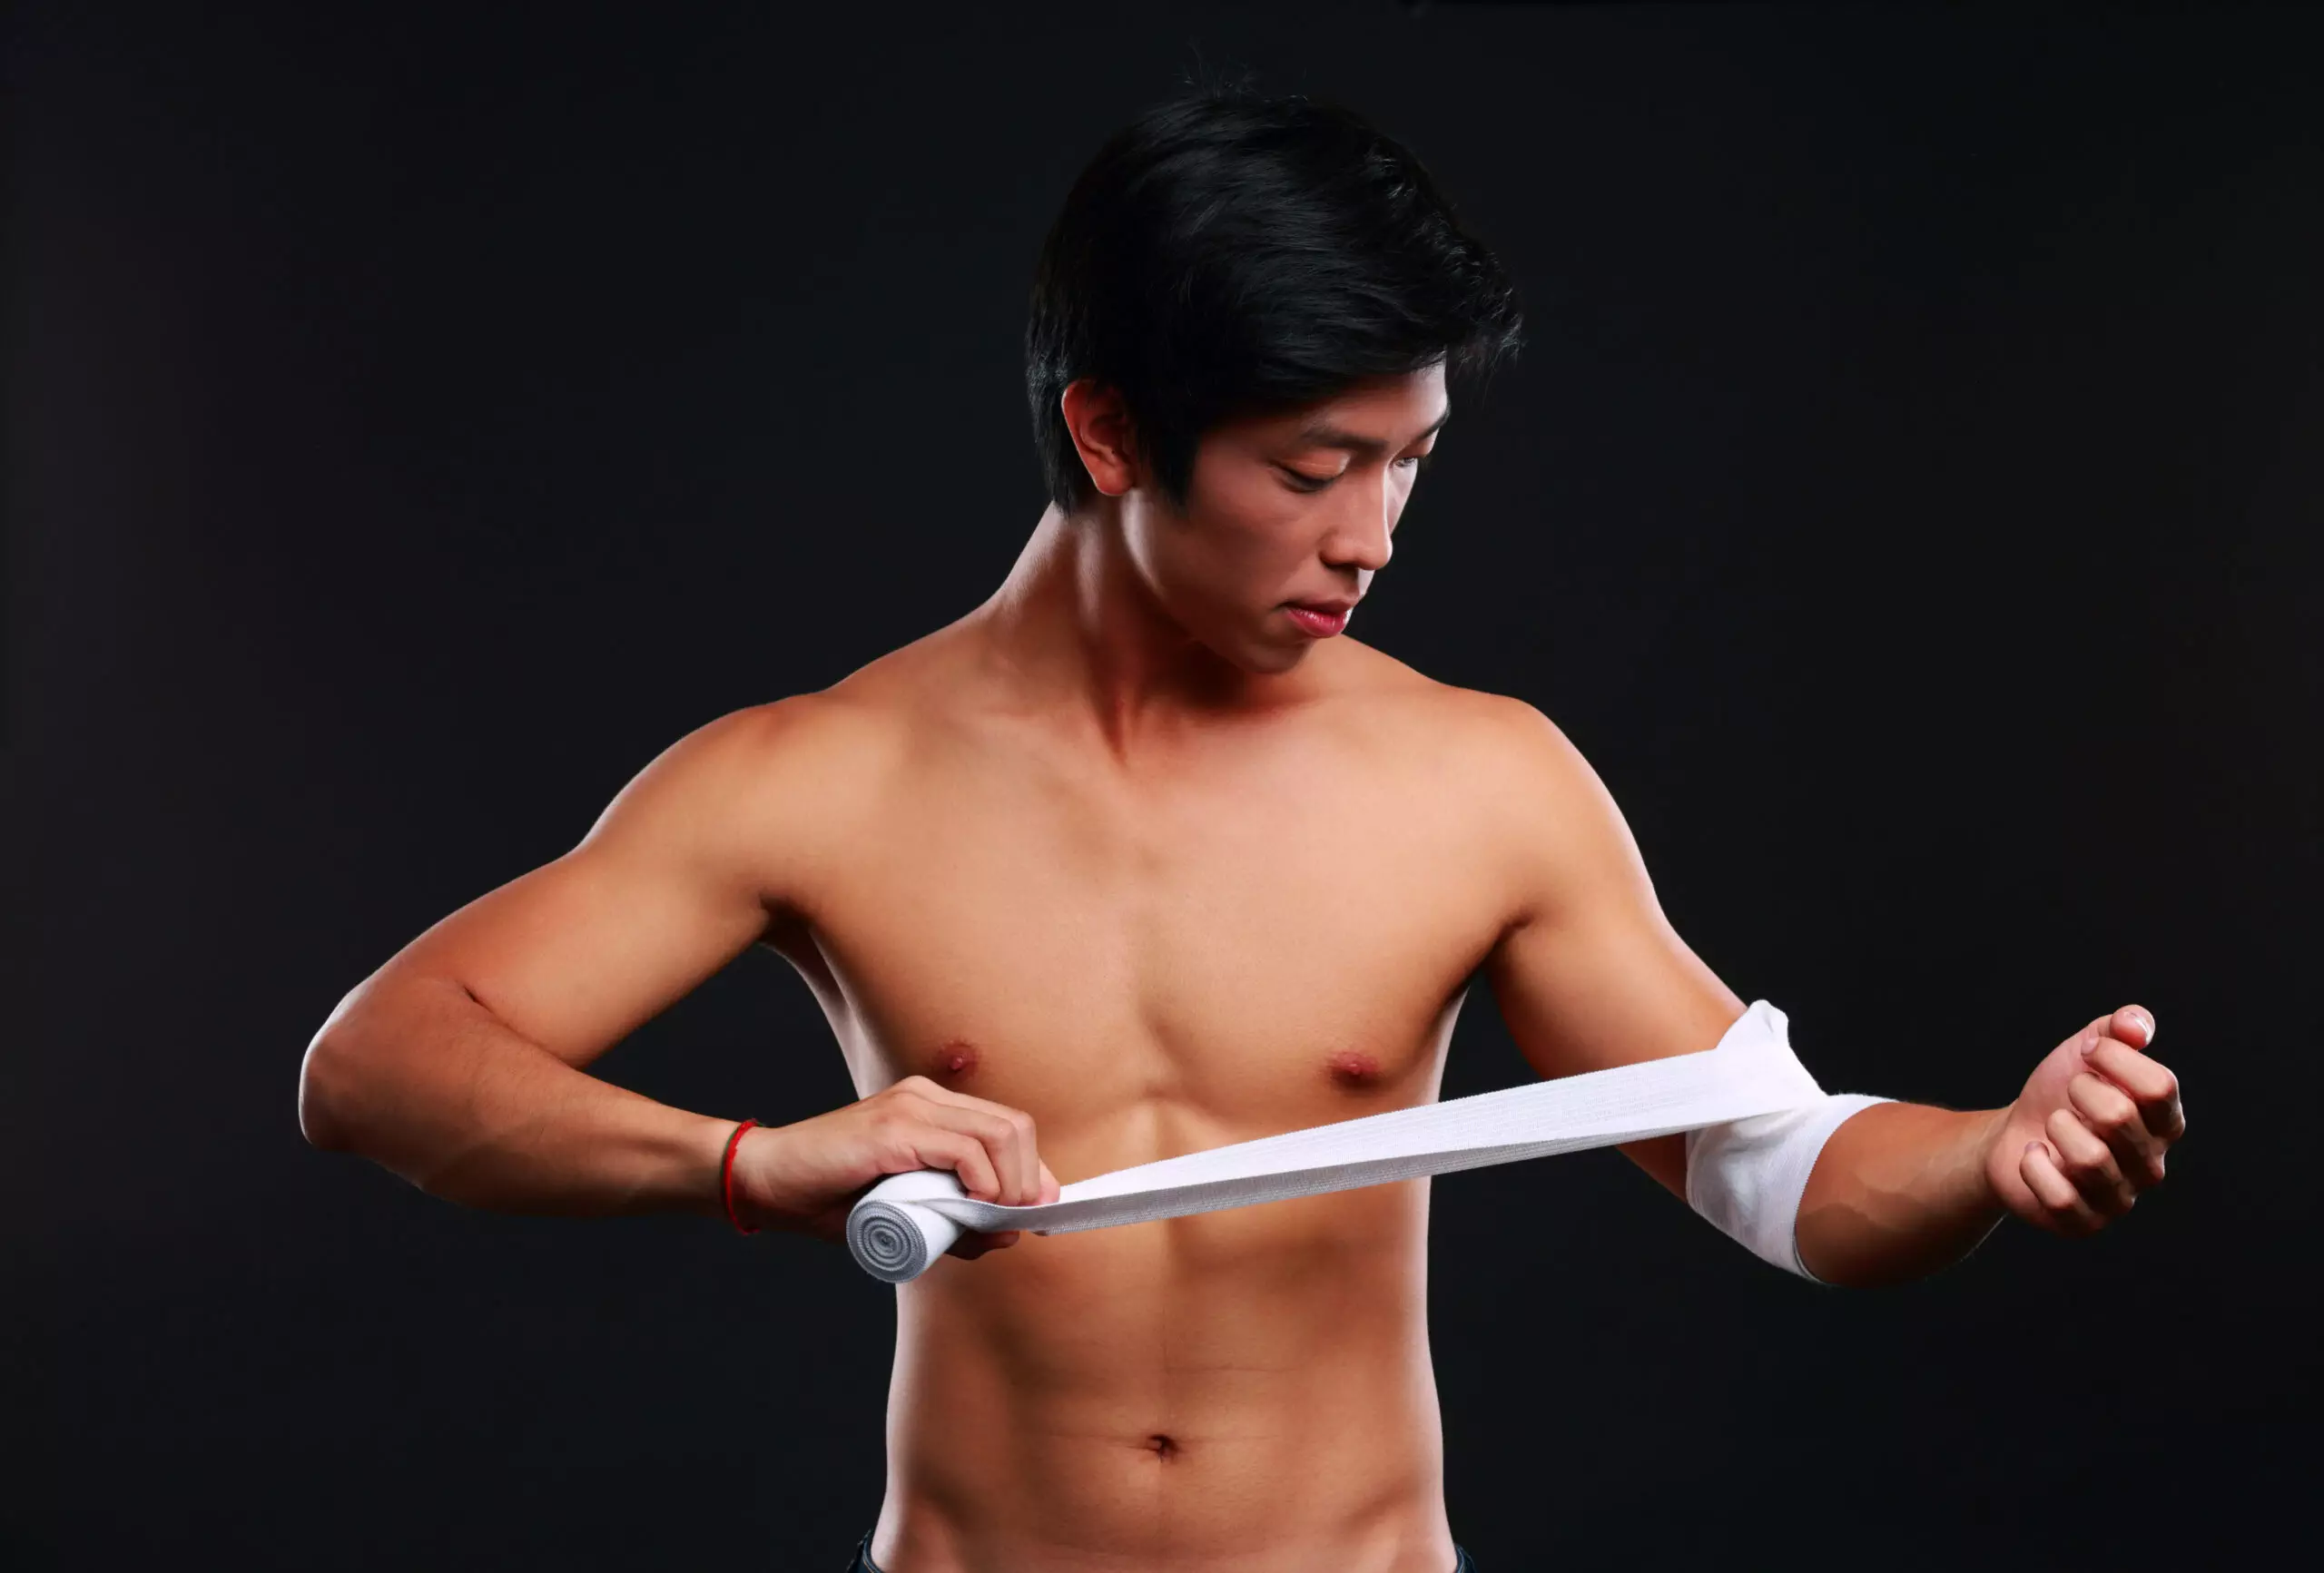 Man wrapping wrist with athletic bandage, fitness concept.